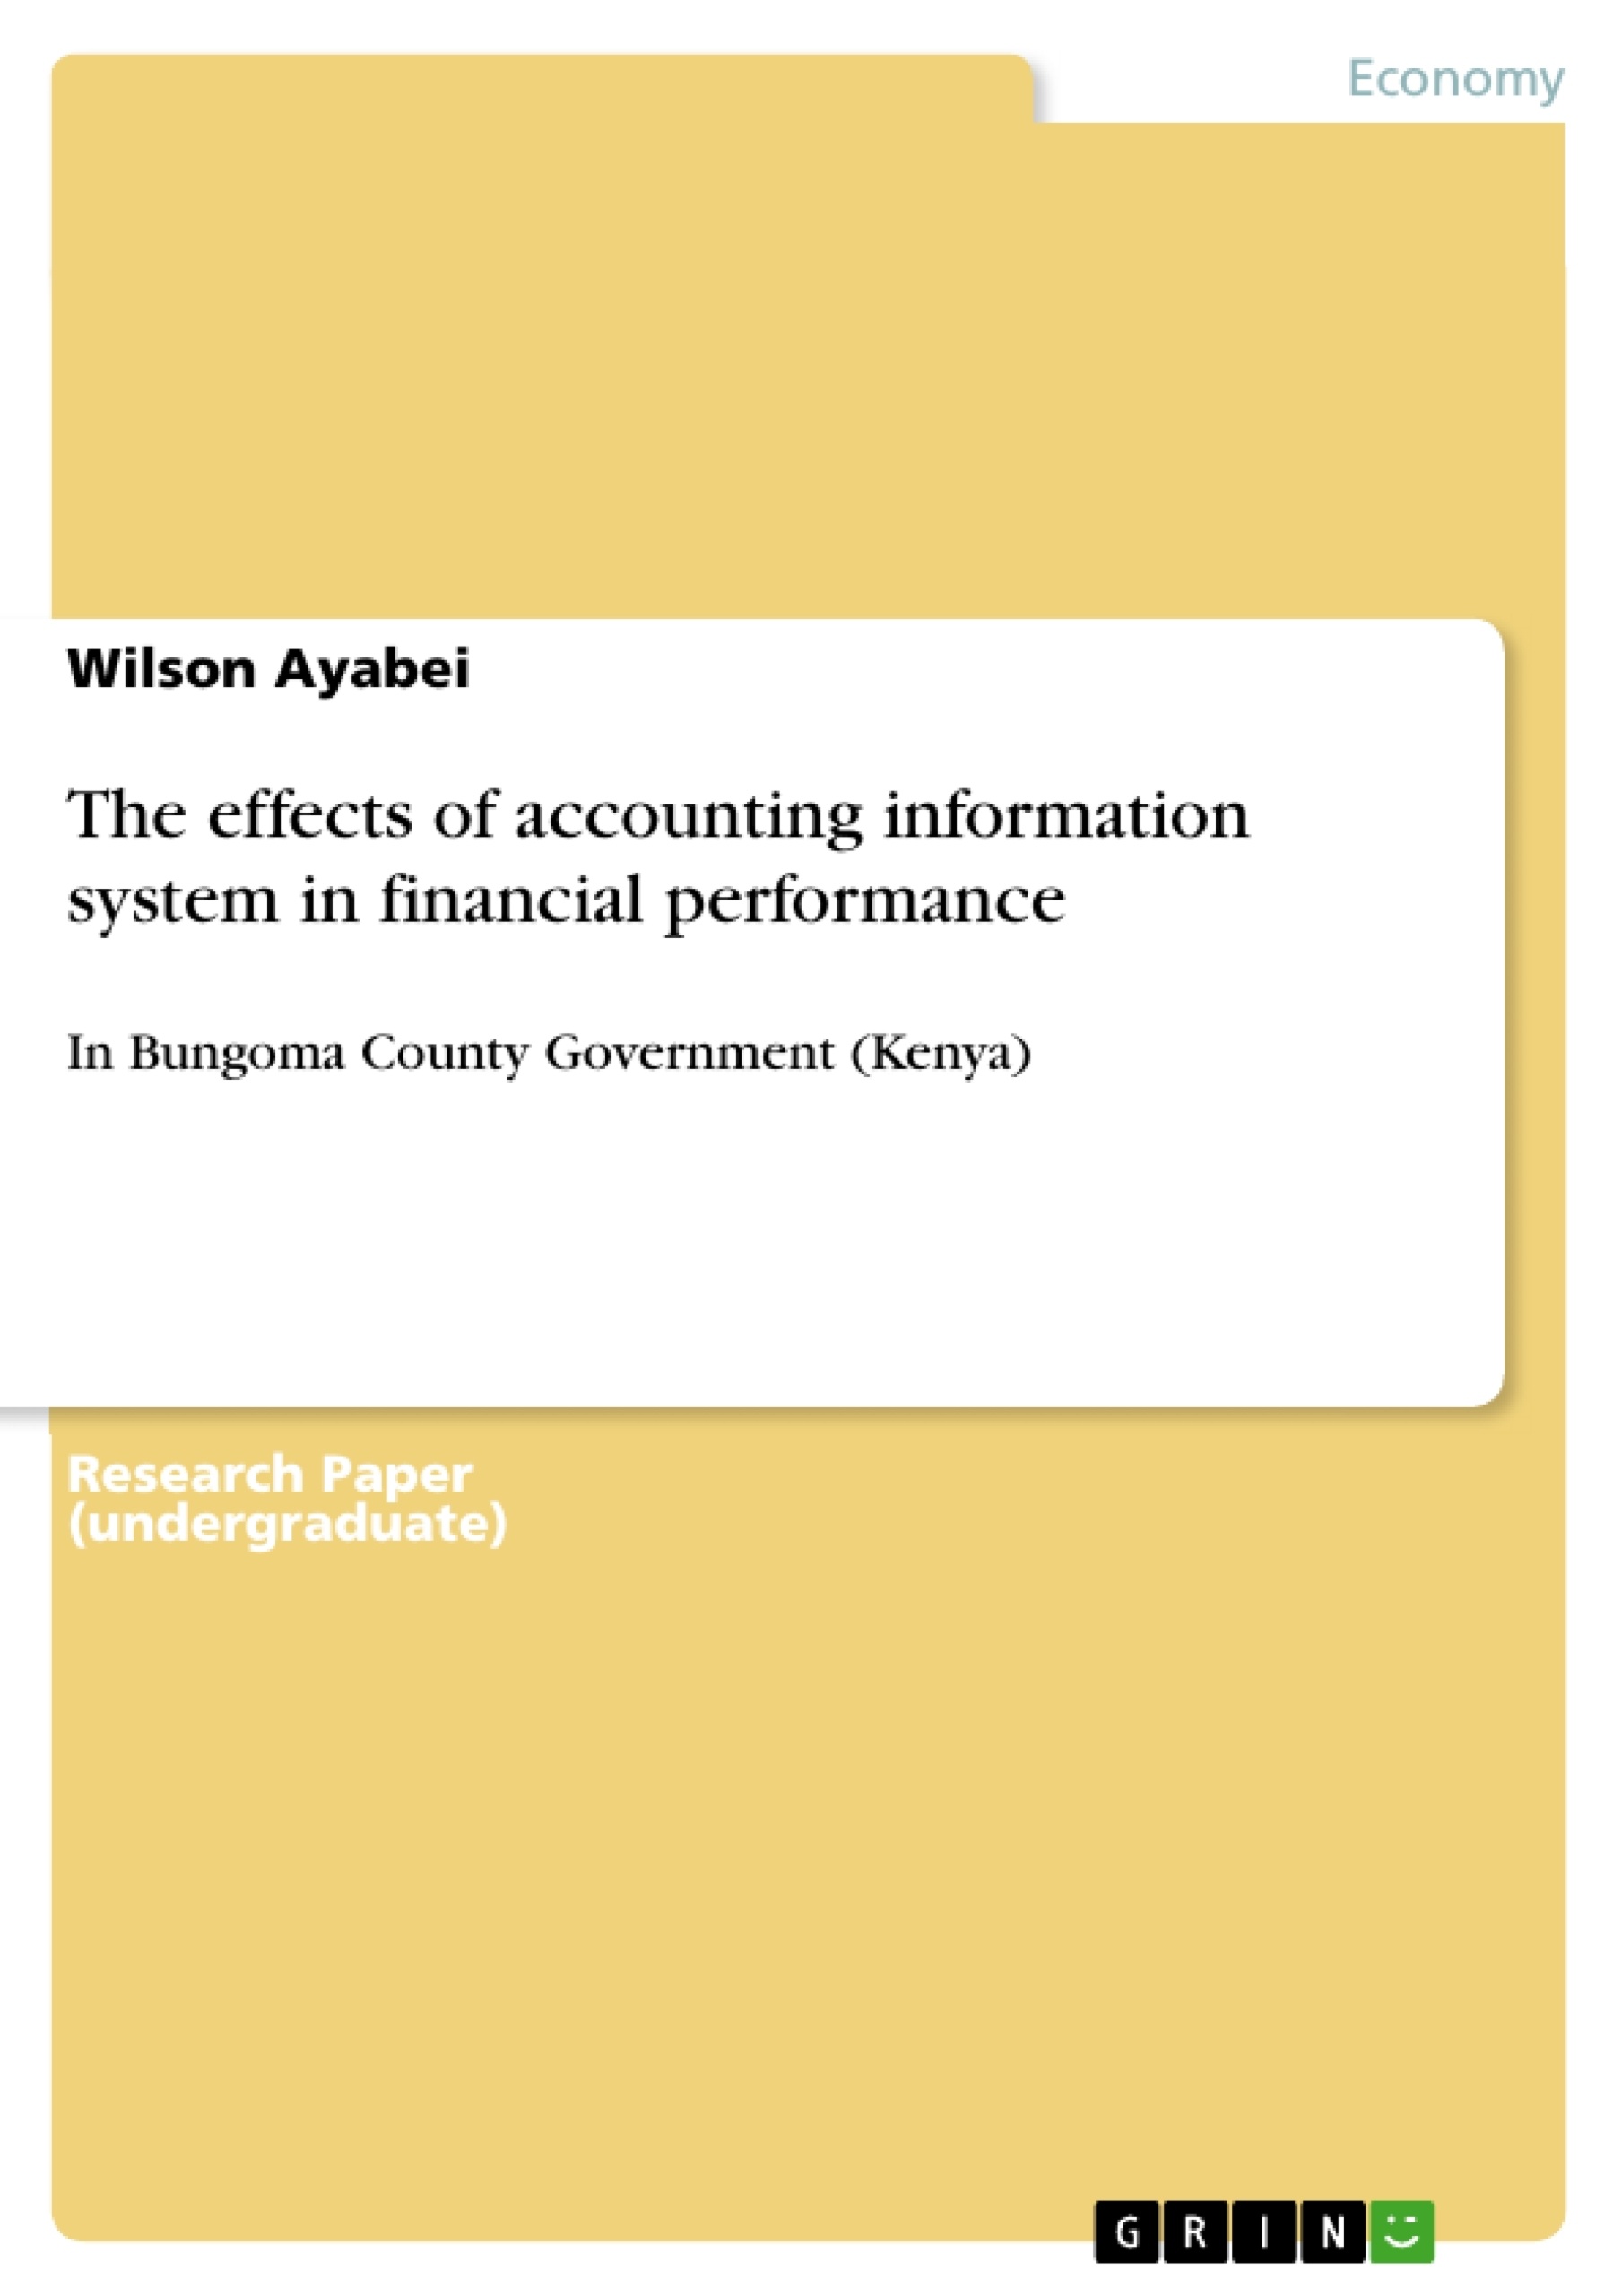 Title: The effects of accounting information system in financial performance